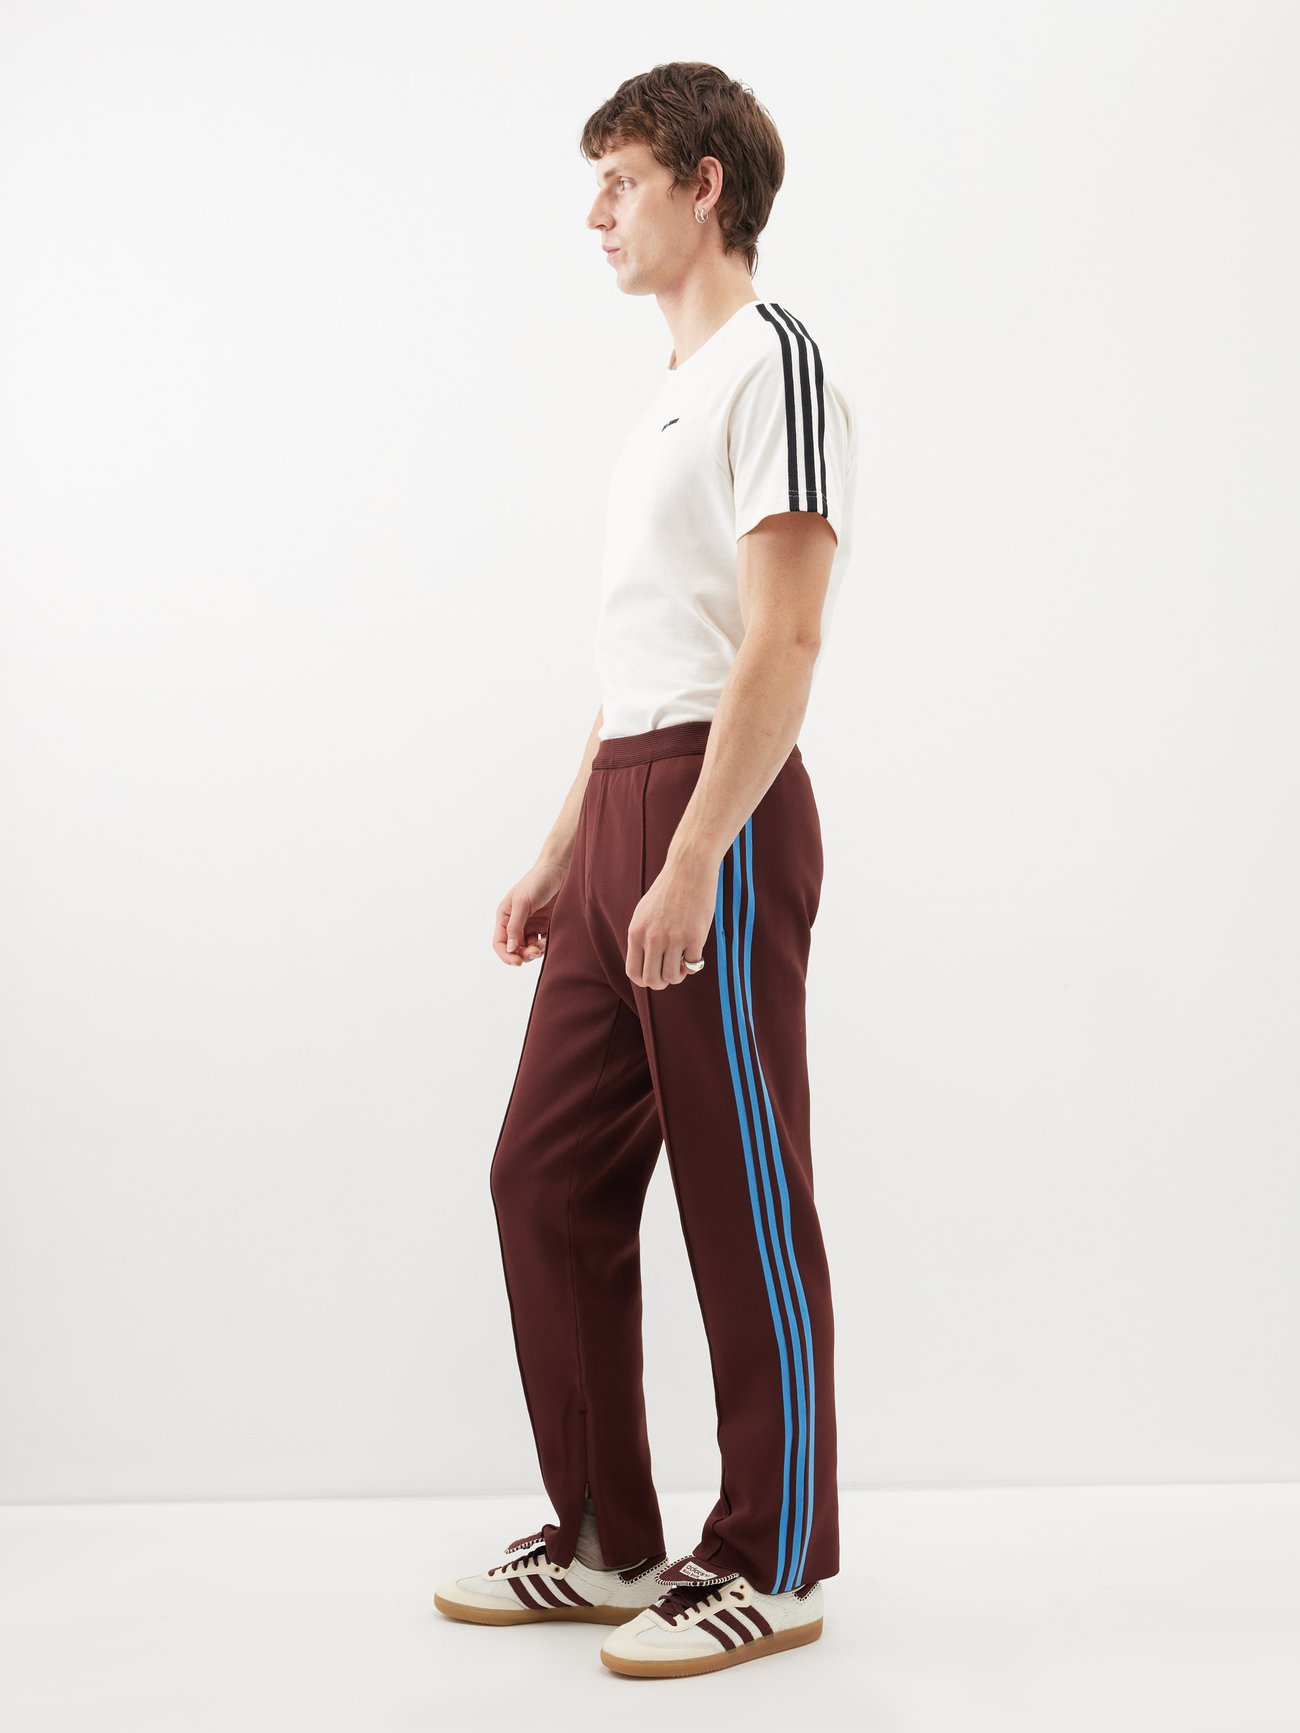 ADIDAS ORIGINALS BY WALES BONNER Striped tech-jersey track pants